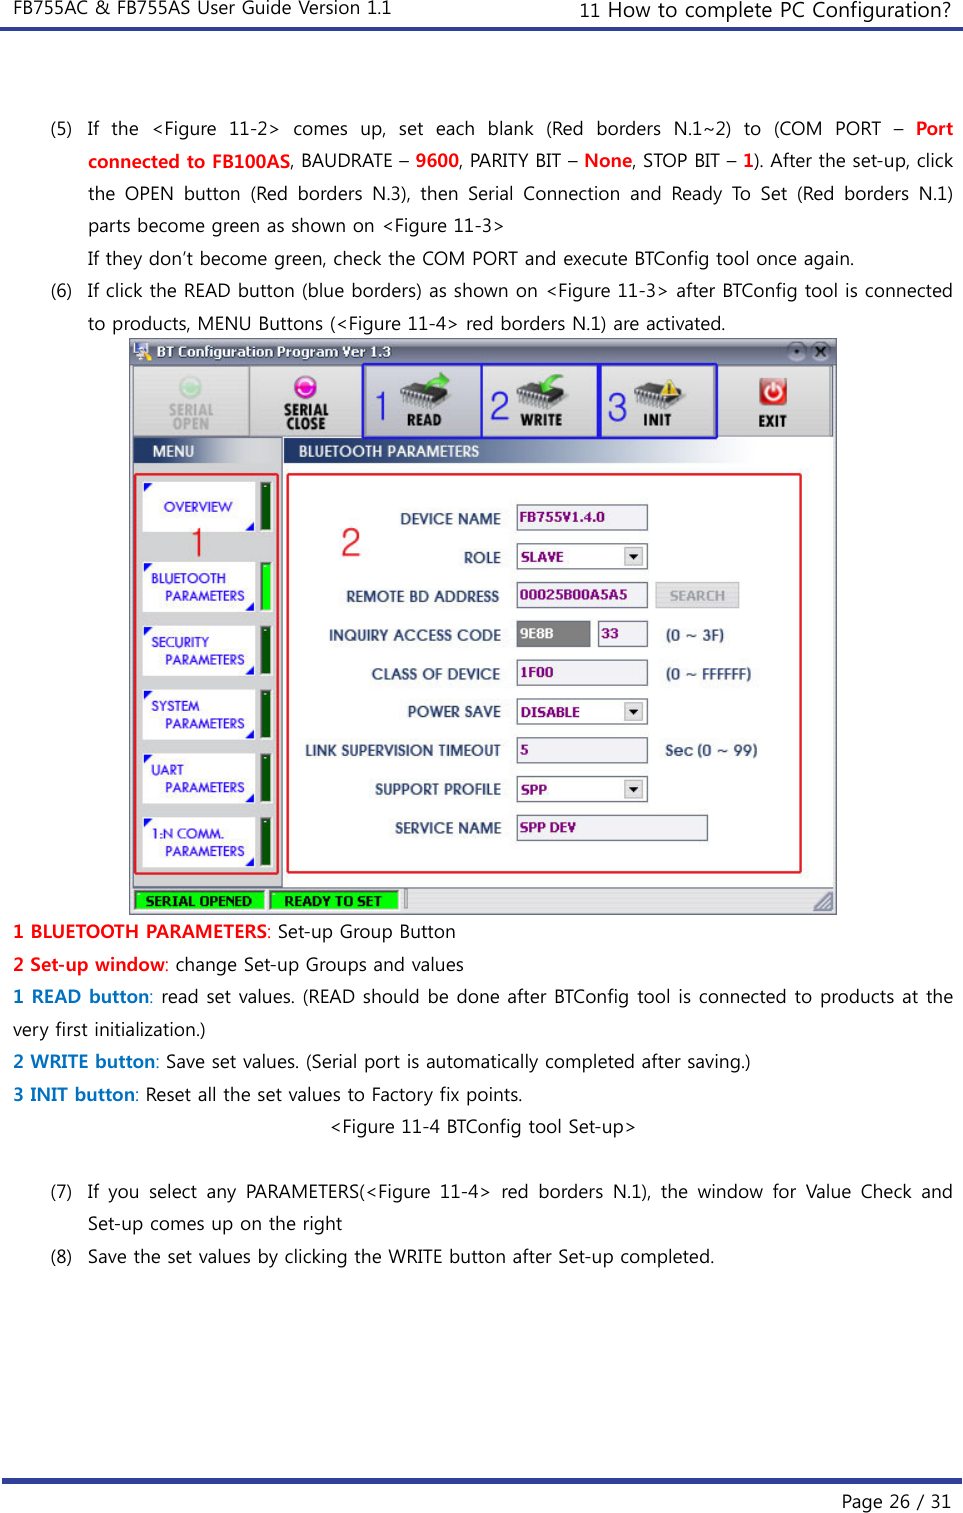 FB755AC &amp; FB755AS User Guide Version 1.1  11 How to complete PC Configuration?  Page 26 / 31  (5) If the &lt;Figure 11-2&gt; comes up, set each blank (Red borders N.1~2)  to  (COM  PORT  – Port connected to FB100AS, BAUDRATE – 9600, PARITY BIT – None, STOP BIT – 1). After the set-up, click the OPEN button (Red borders N.3), then Serial Connection and Ready To Set (Red borders N.1) parts become green as shown on &lt;Figure 11-3&gt; If they don’t become green, check the COM PORT and execute BTConfig tool once again. (6) If click the READ button (blue borders) as shown on &lt;Figure 11-3&gt; after BTConfig tool is connected to products, MENU Buttons (&lt;Figure 11-4&gt; red borders N.1) are activated.  1 BLUETOOTH PARAMETERS: Set-up Group Button 2 Set-up window: change Set-up Groups and values 1 READ button: read set values. (READ should be done after BTConfig tool is connected to products at the very first initialization.) 2 WRITE button: Save set values. (Serial port is automatically completed after saving.) 3 INIT button: Reset all the set values to Factory fix points. &lt;Figure 11-4 BTConfig tool Set-up&gt;  (7) If you select any PARAMETERS(&lt;Figure 11-4&gt; red borders N.1), the  window  for  Value  Check  and Set-up comes up on the right (8) Save the set values by clicking the WRITE button after Set-up completed. 